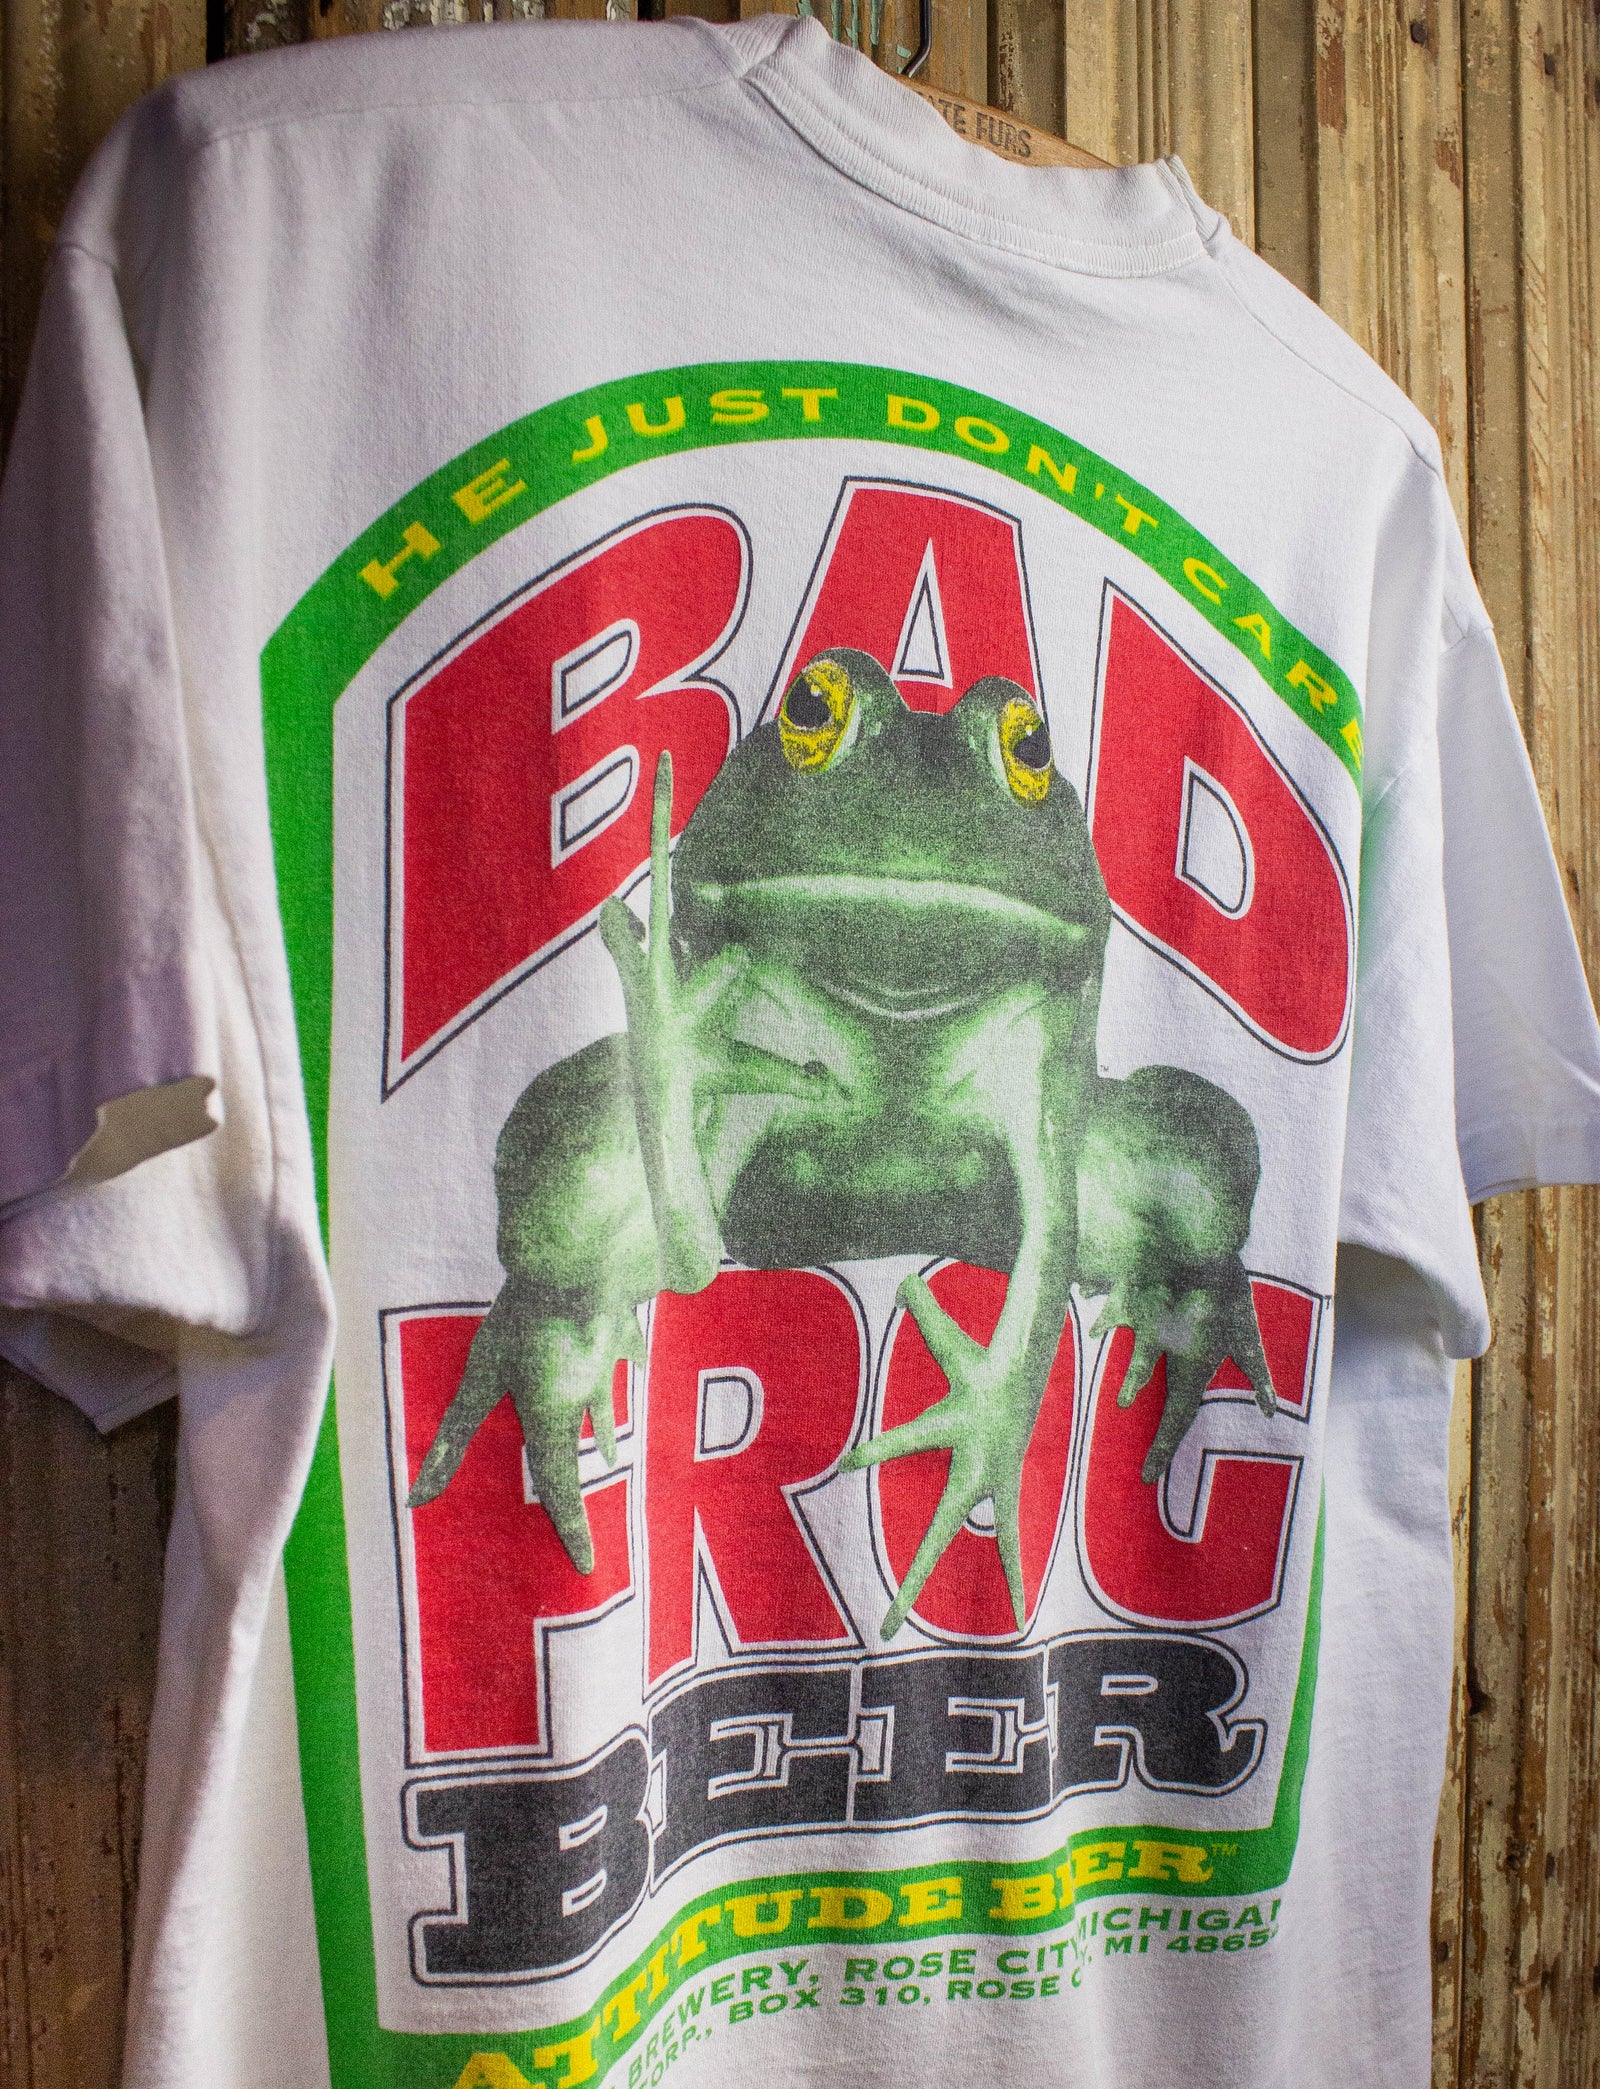 Vintage Bad Frog Beer Graphic T Shirt 90s White XL